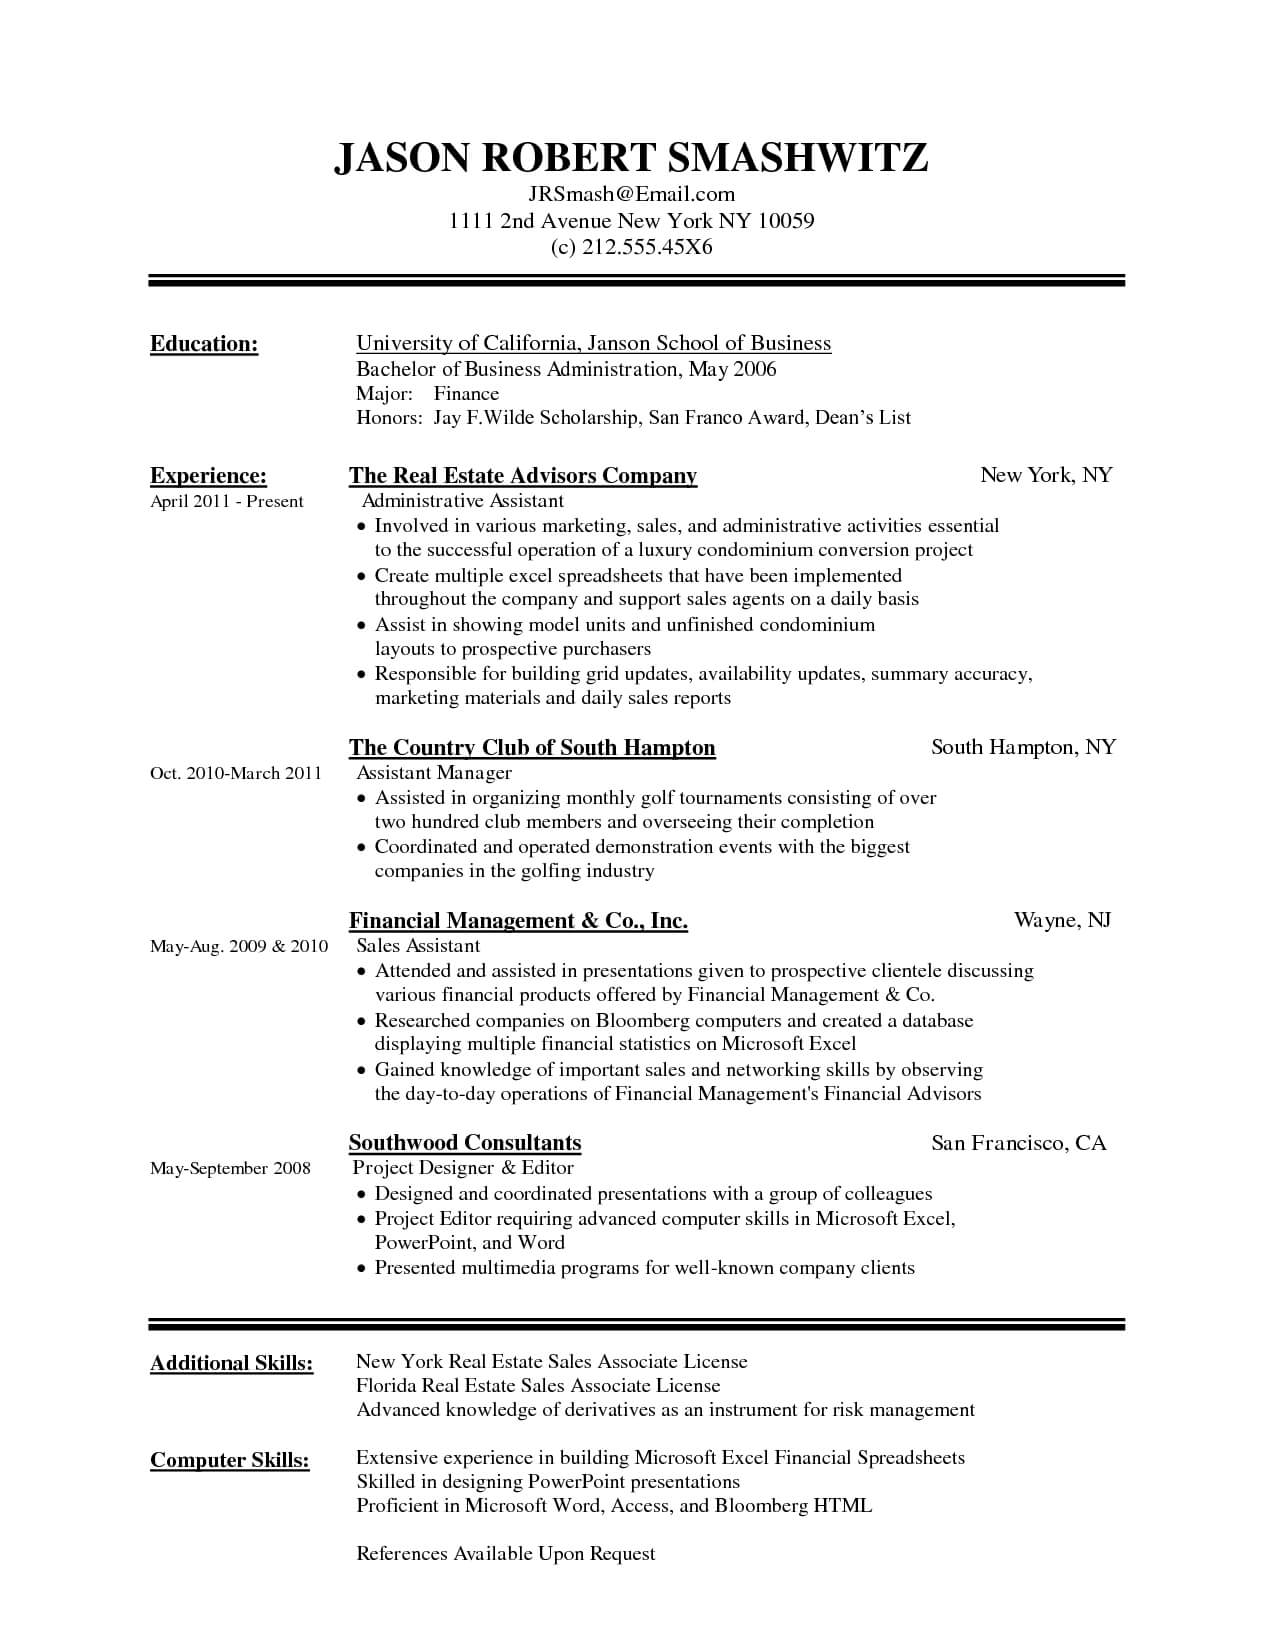 Resumes And Cover Letters Office Com Microsoft Word Resume With Microsoft Word Resumes Templates